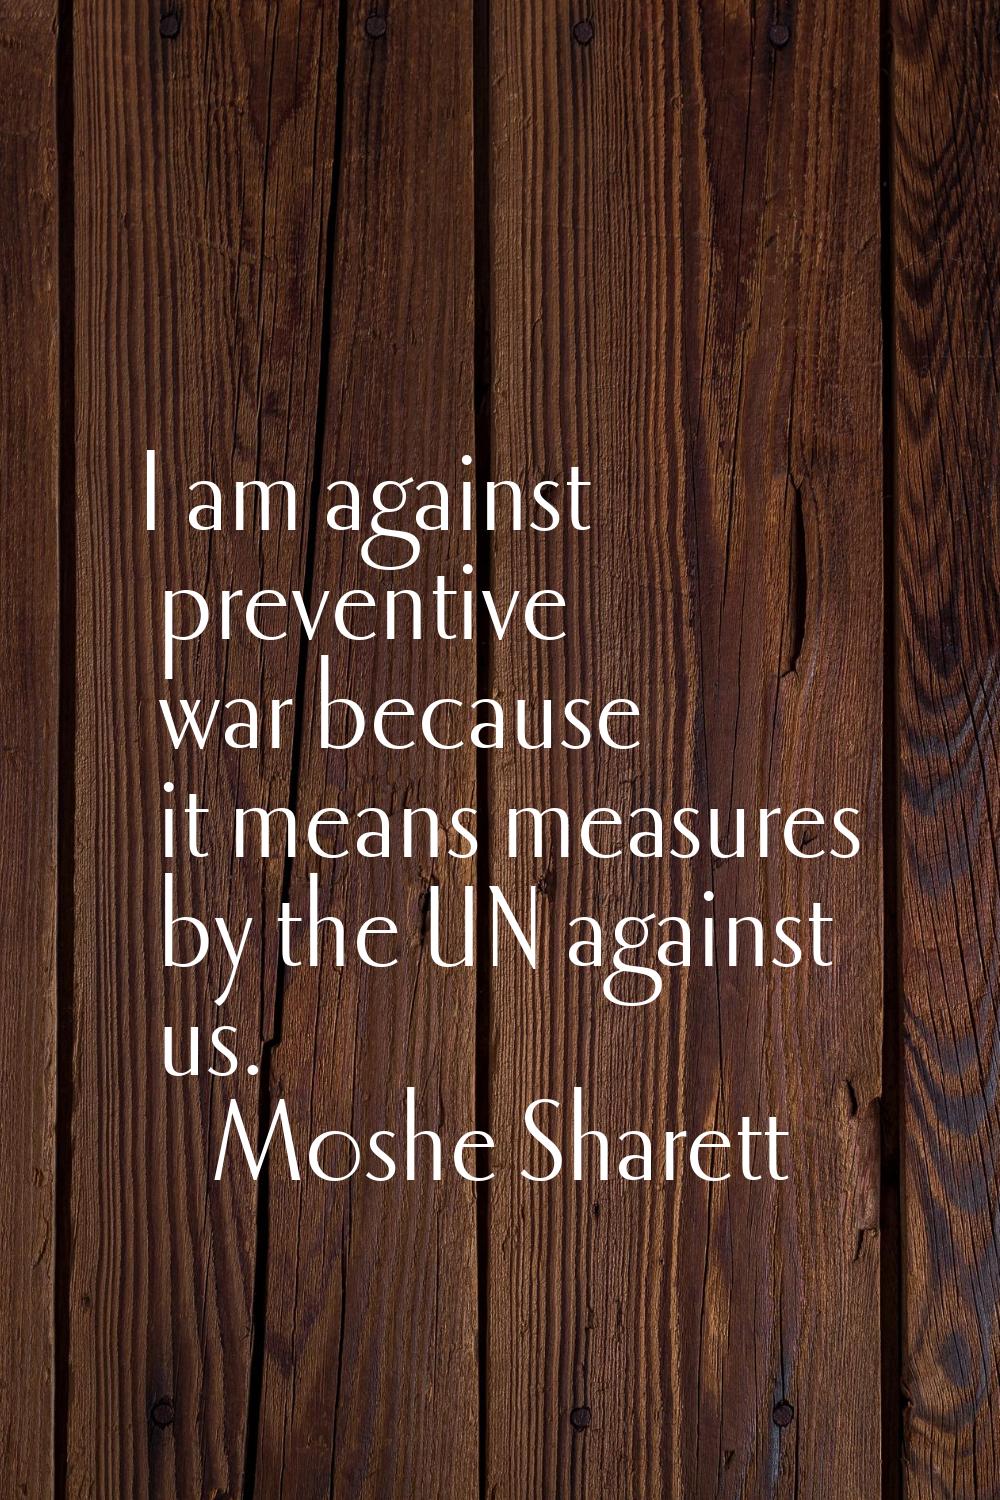 I am against preventive war because it means measures by the UN against us.